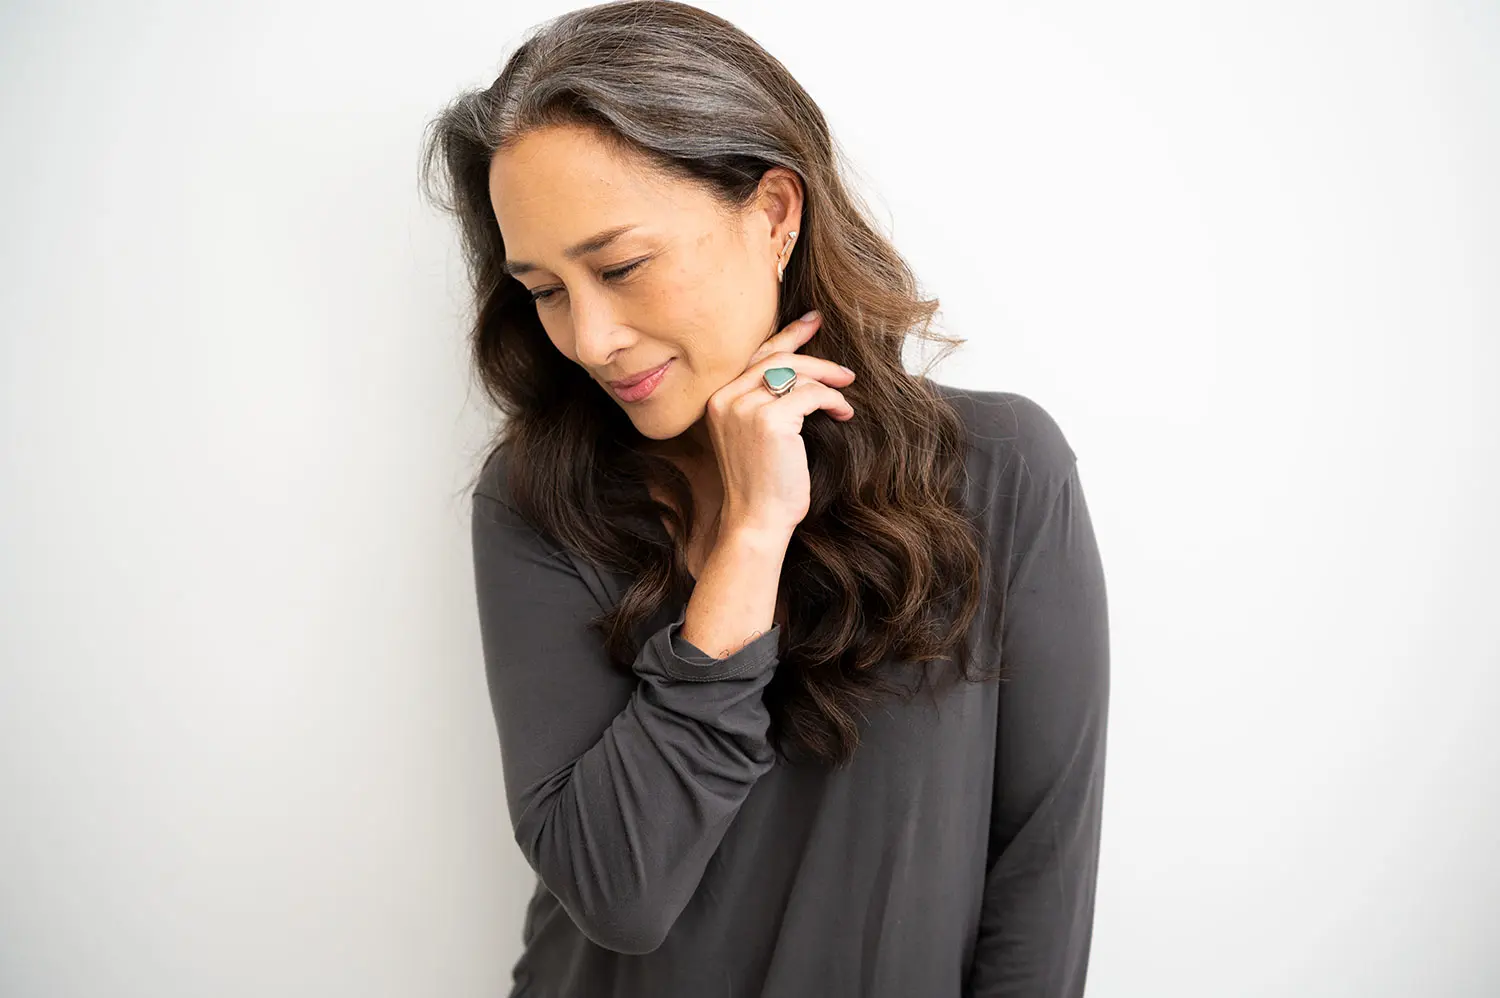 Woman of Asian descent with turquoise ring, holding back hair, looking down.